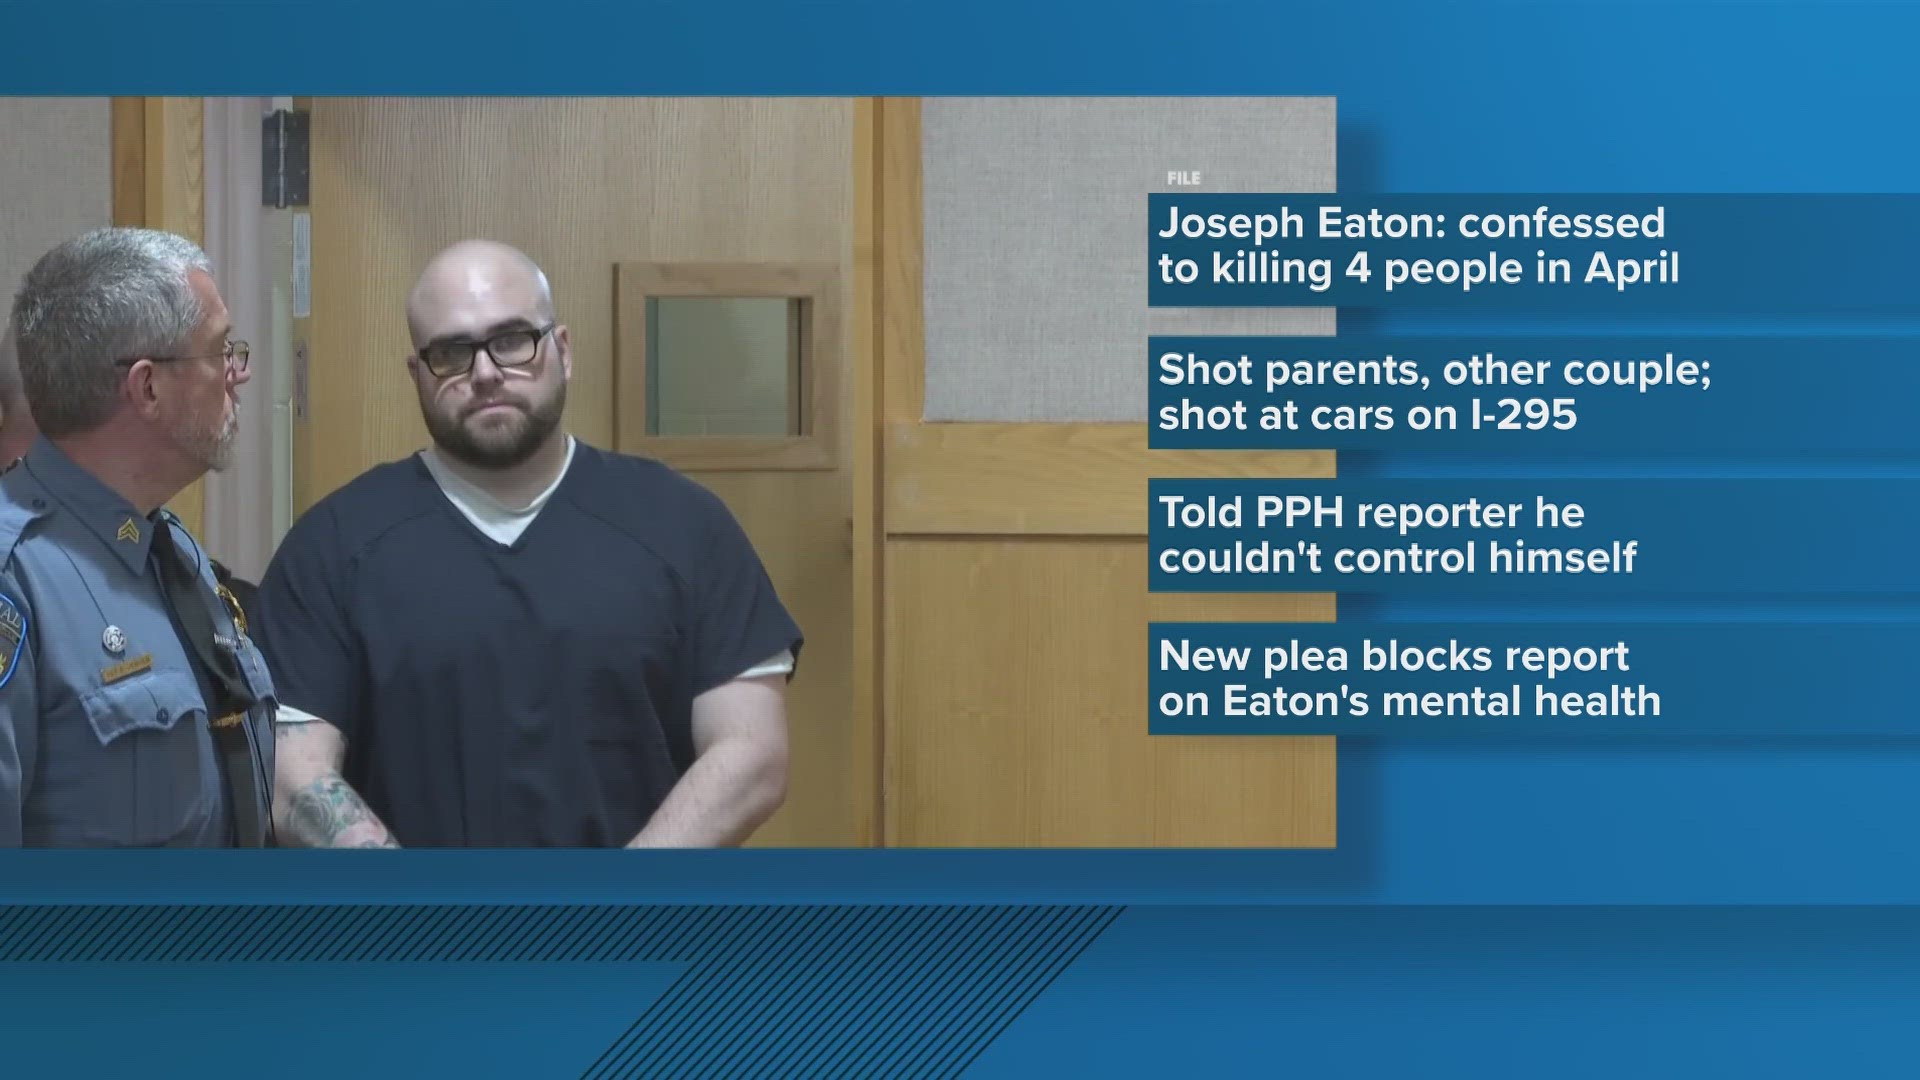 Joseph Eaton was charged with killing his parents and their two friends, days after being released from prison.